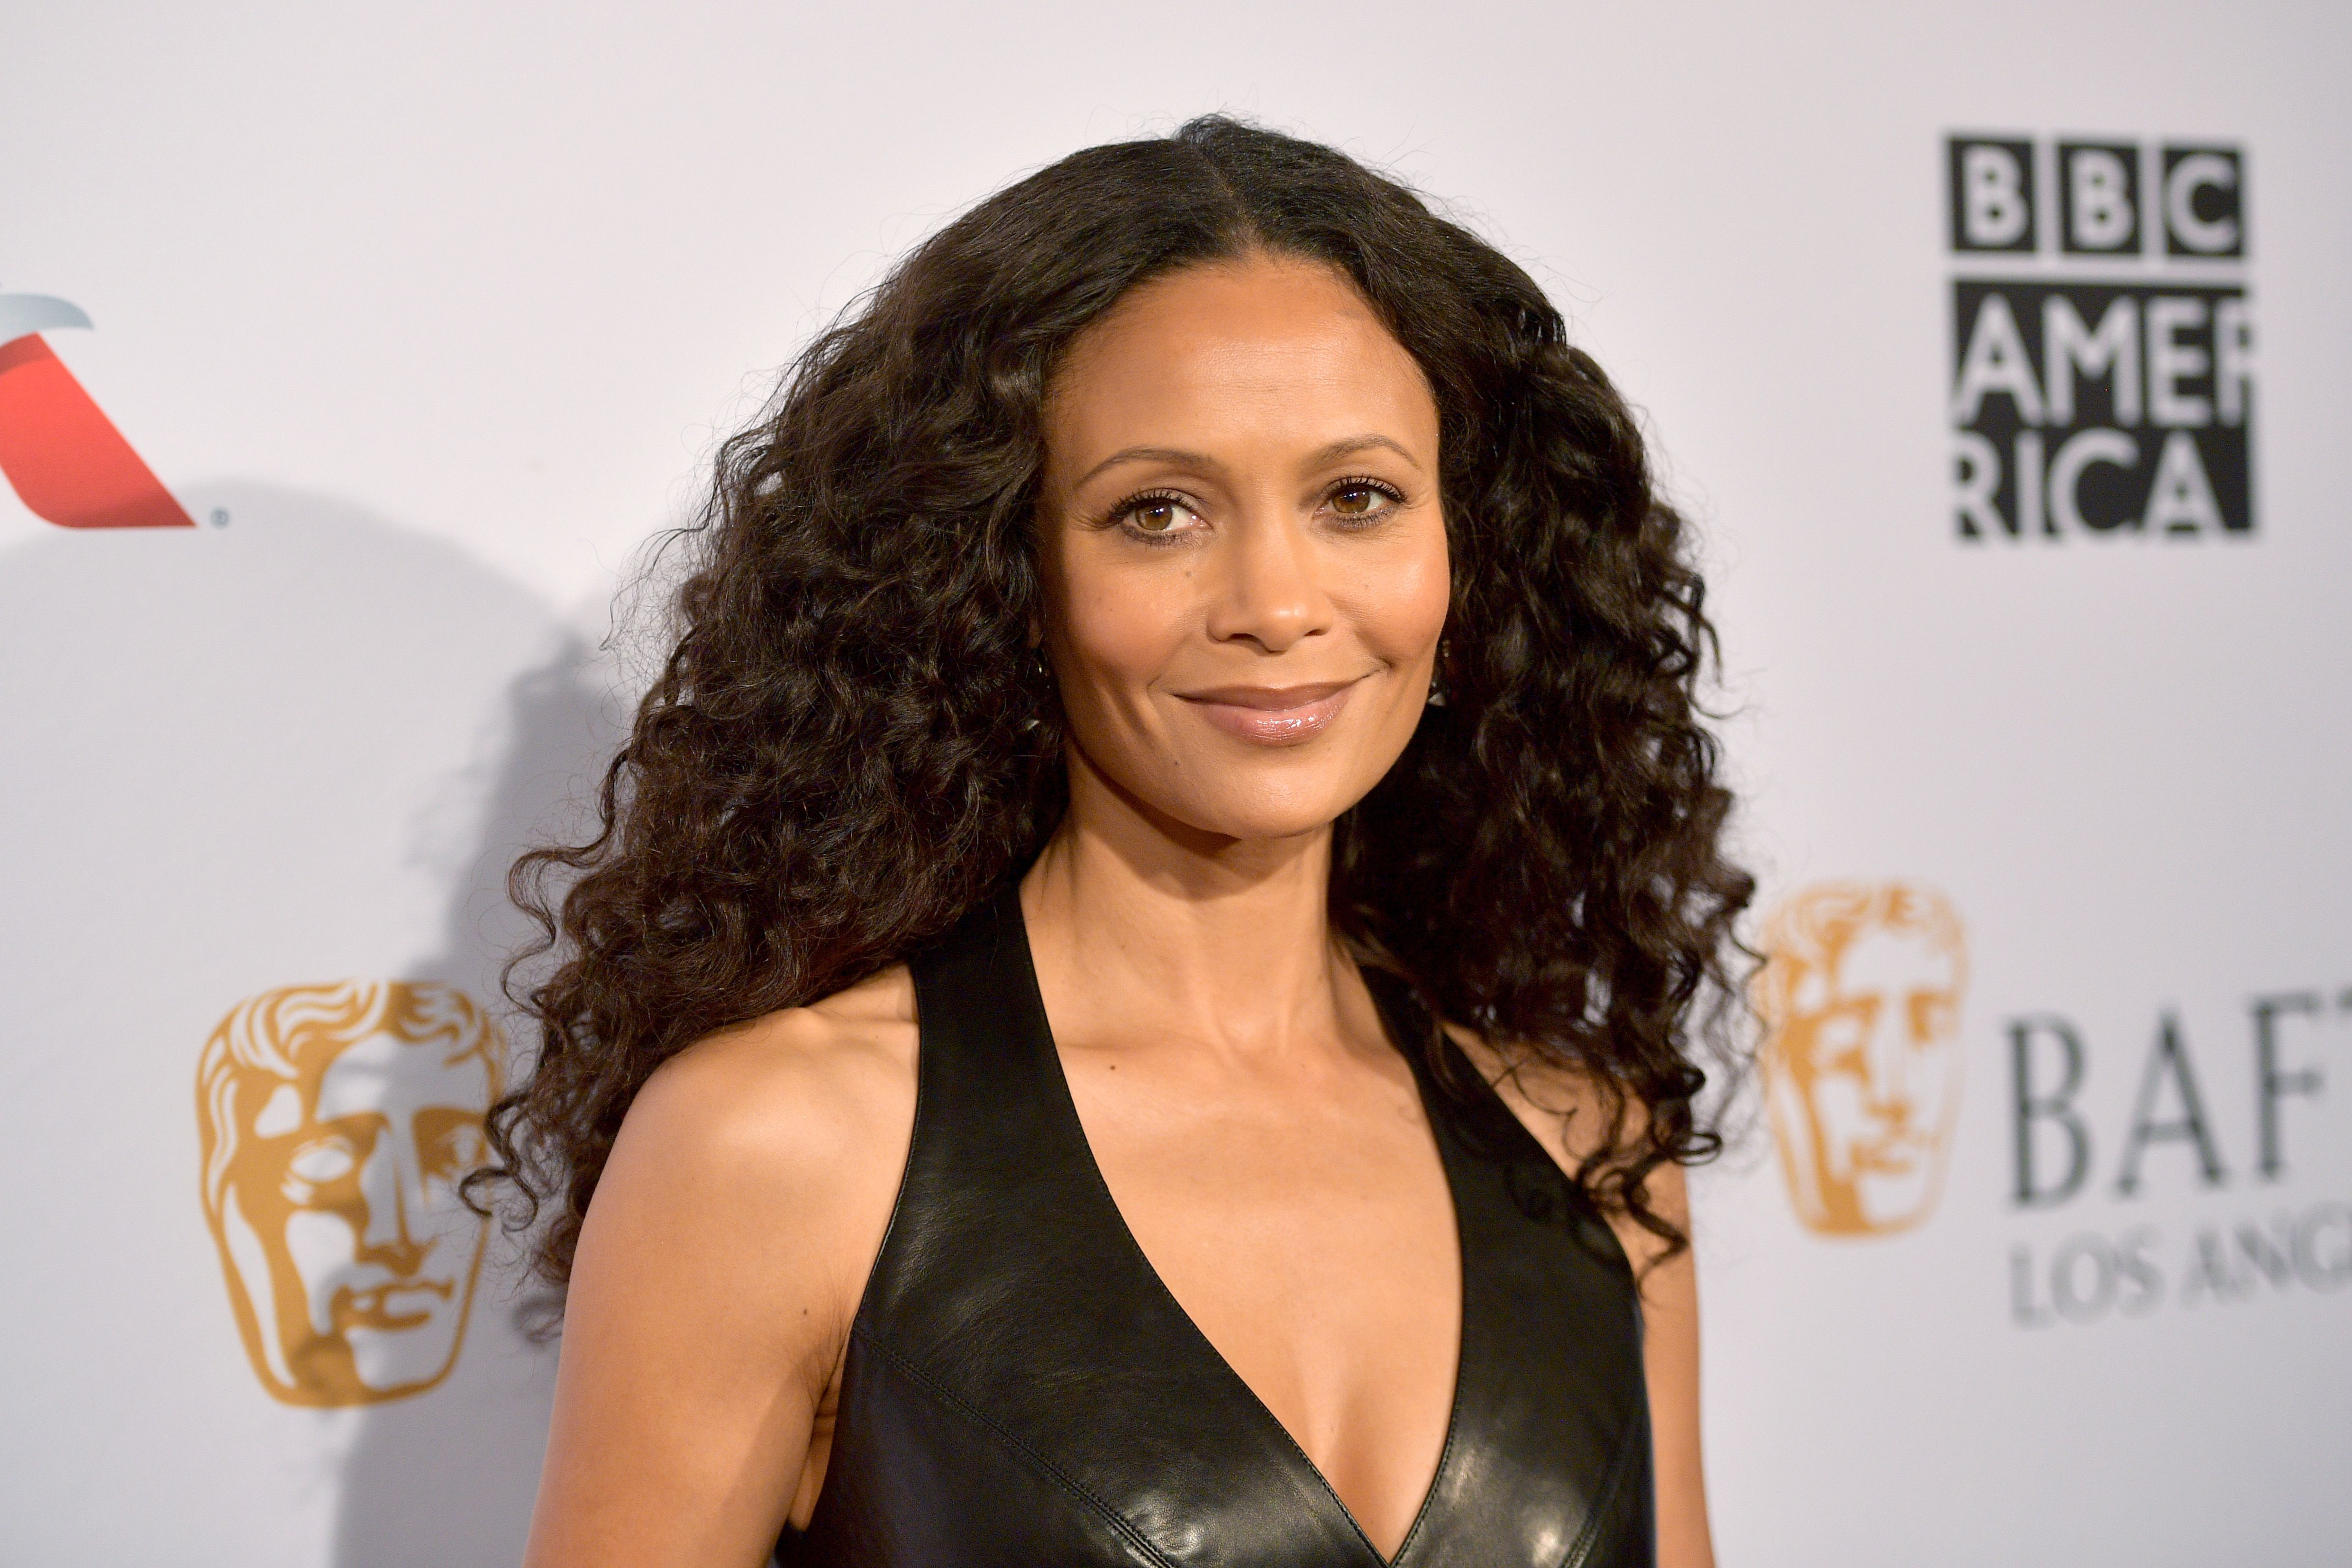 Thandie Newton on Surviving Sexual Assault as a Young Girl